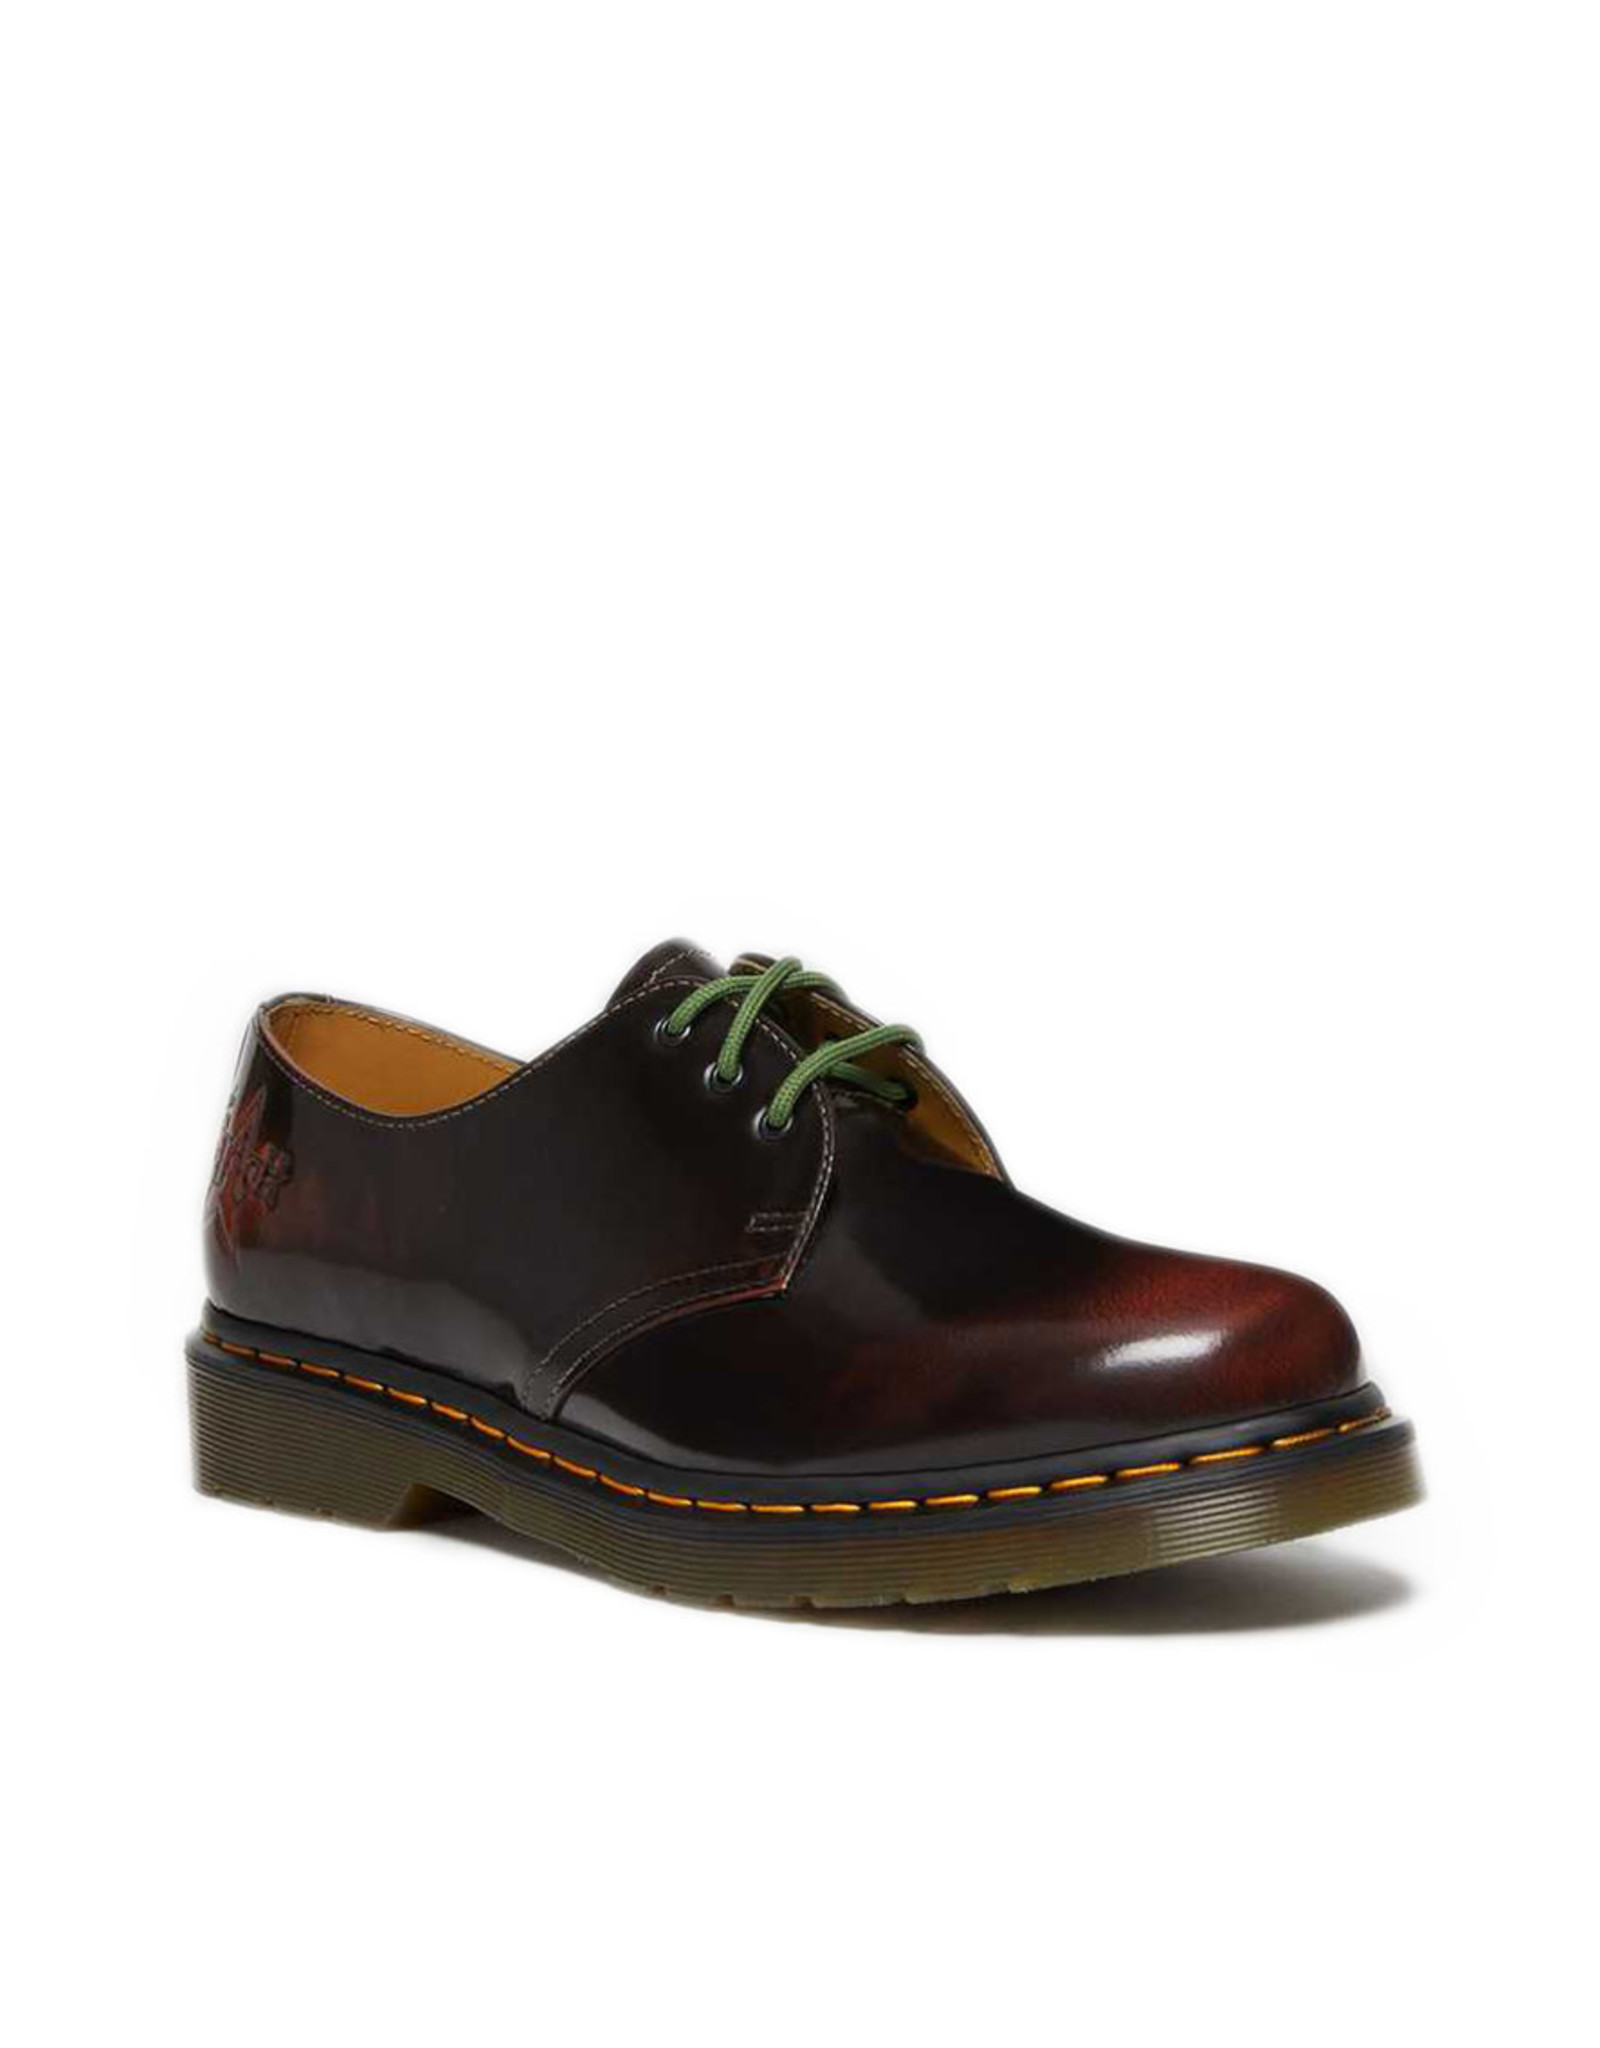 DR. MARTENS 1461 THE CLASH CHERRY RED ARCADIA 301TCR - R28001600